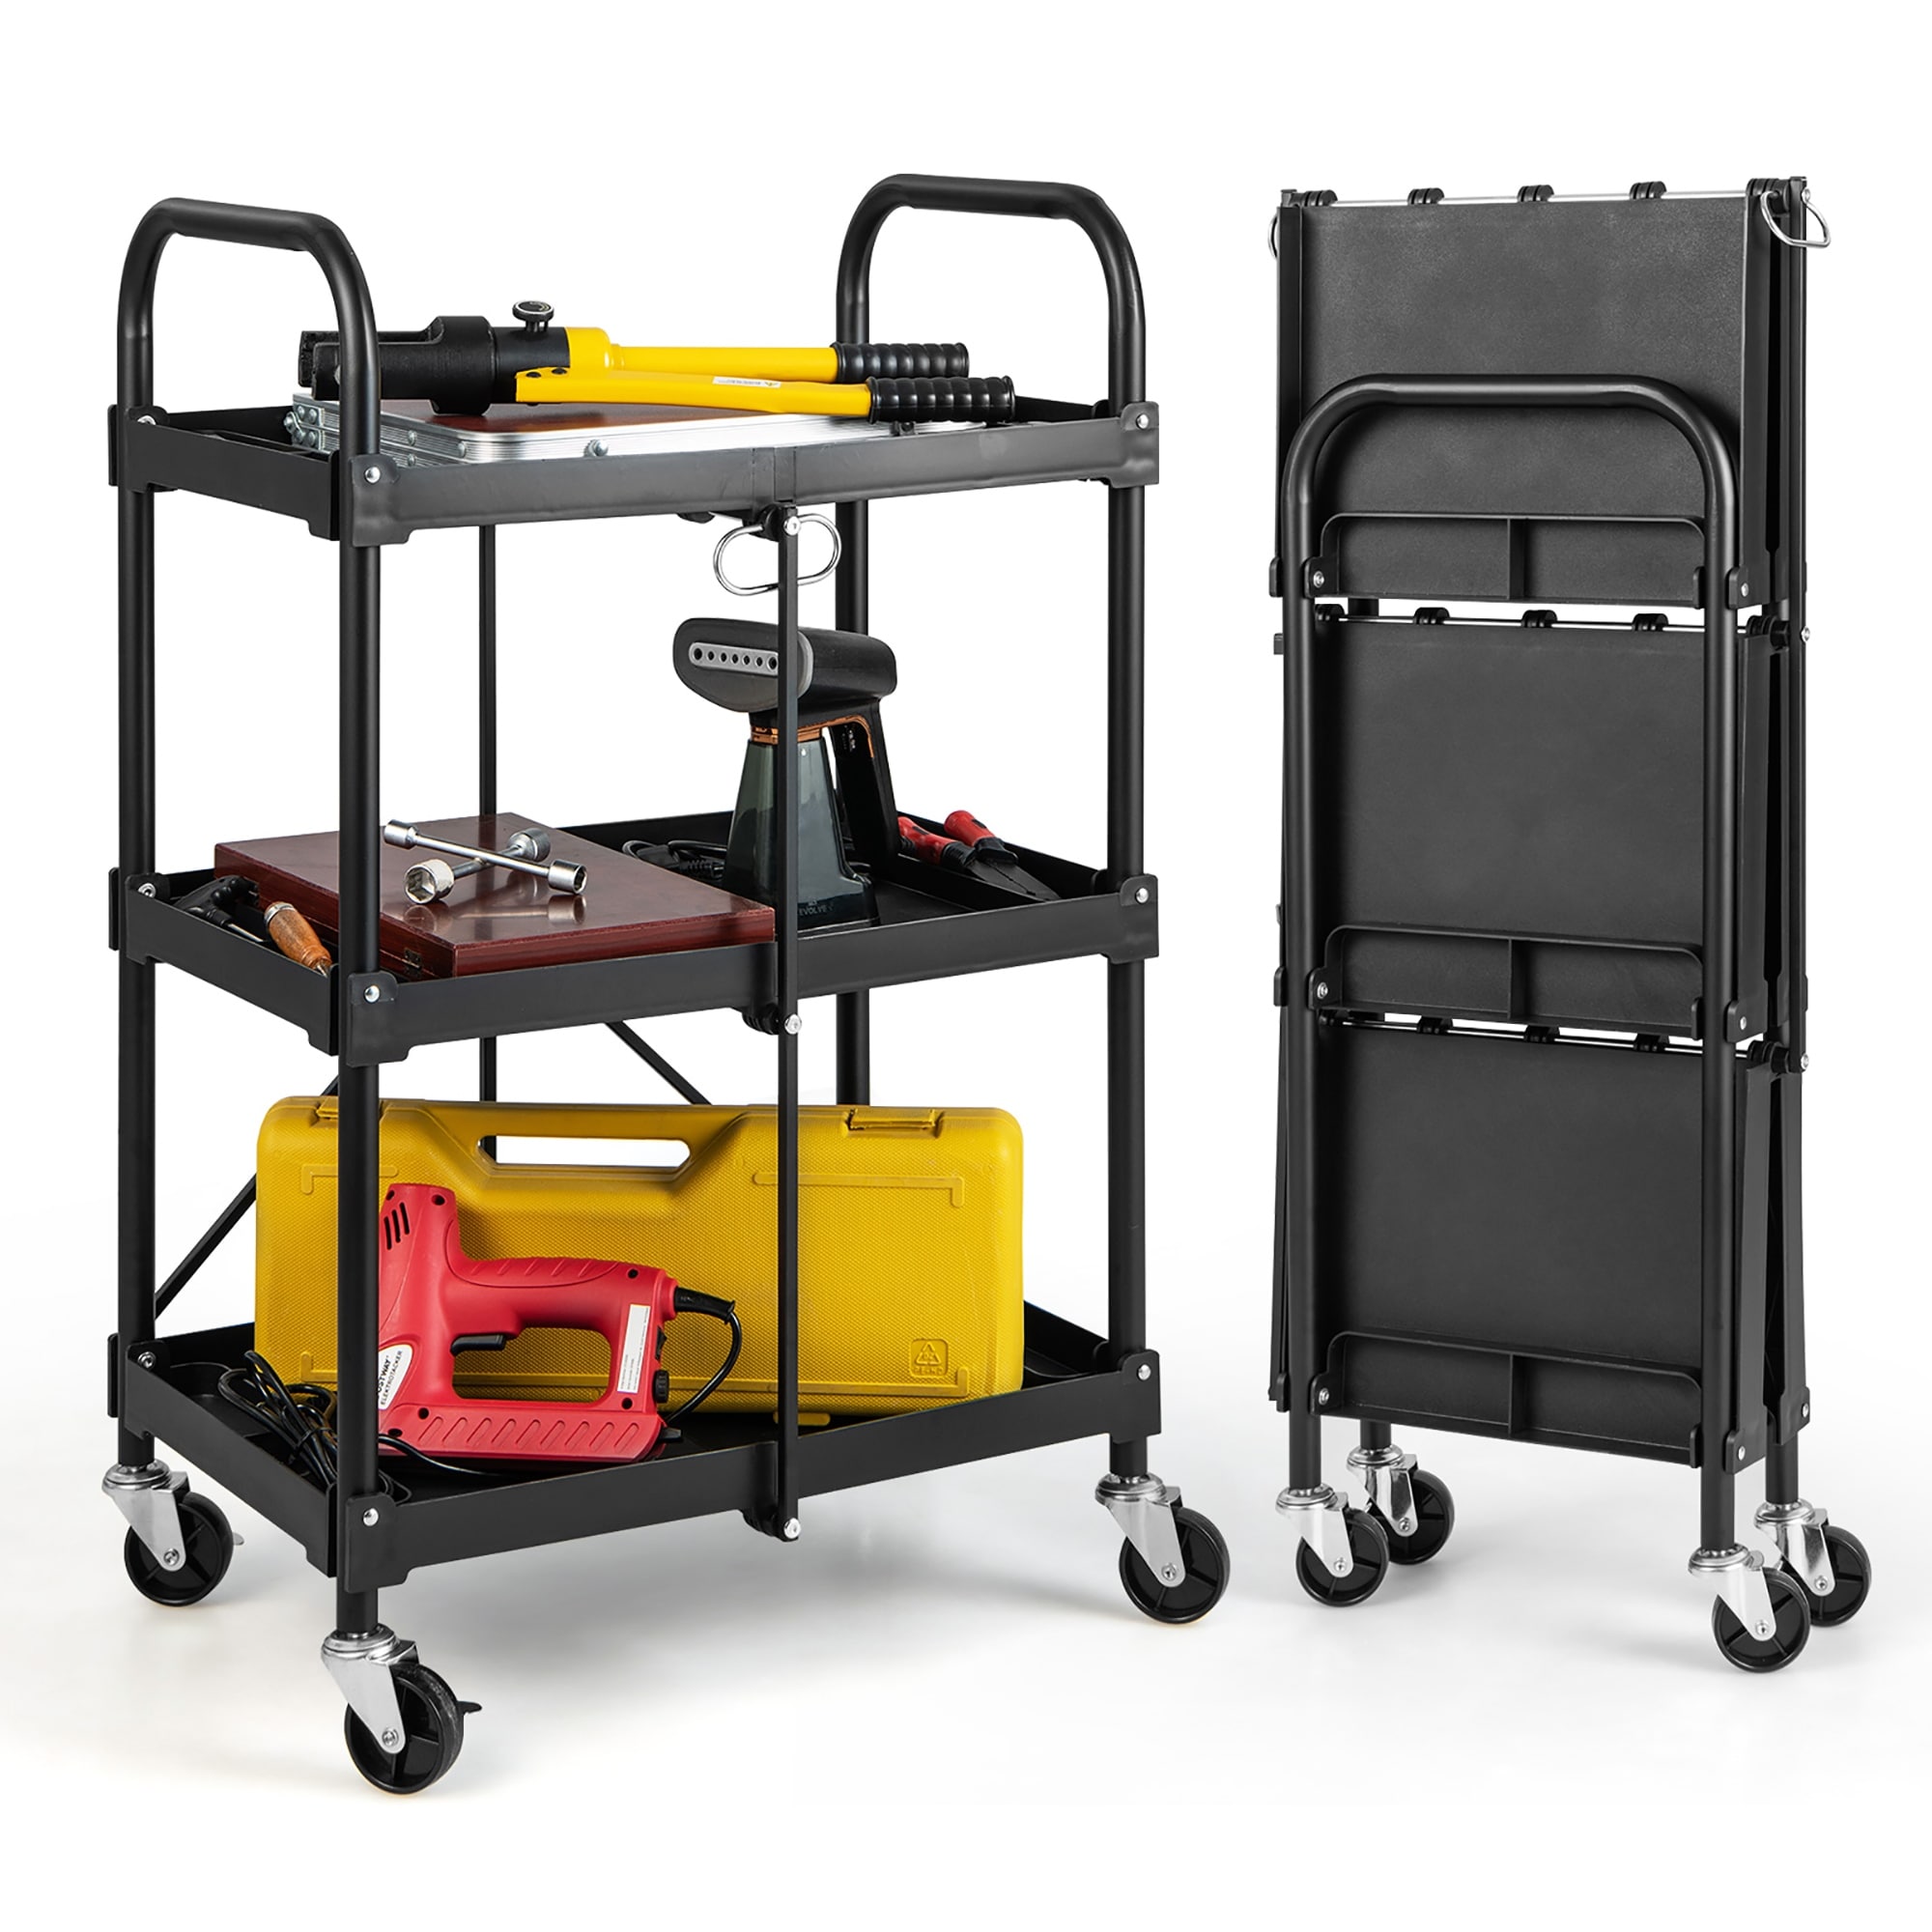 https://ak1.ostkcdn.com/images/products/is/images/direct/026bf963dfef5828f22b92427167732178cc85e7/Costway-Folding-Collapsible-Service-Cart-Heavy-Duty-3-Shelf-Tool-Cart.jpg